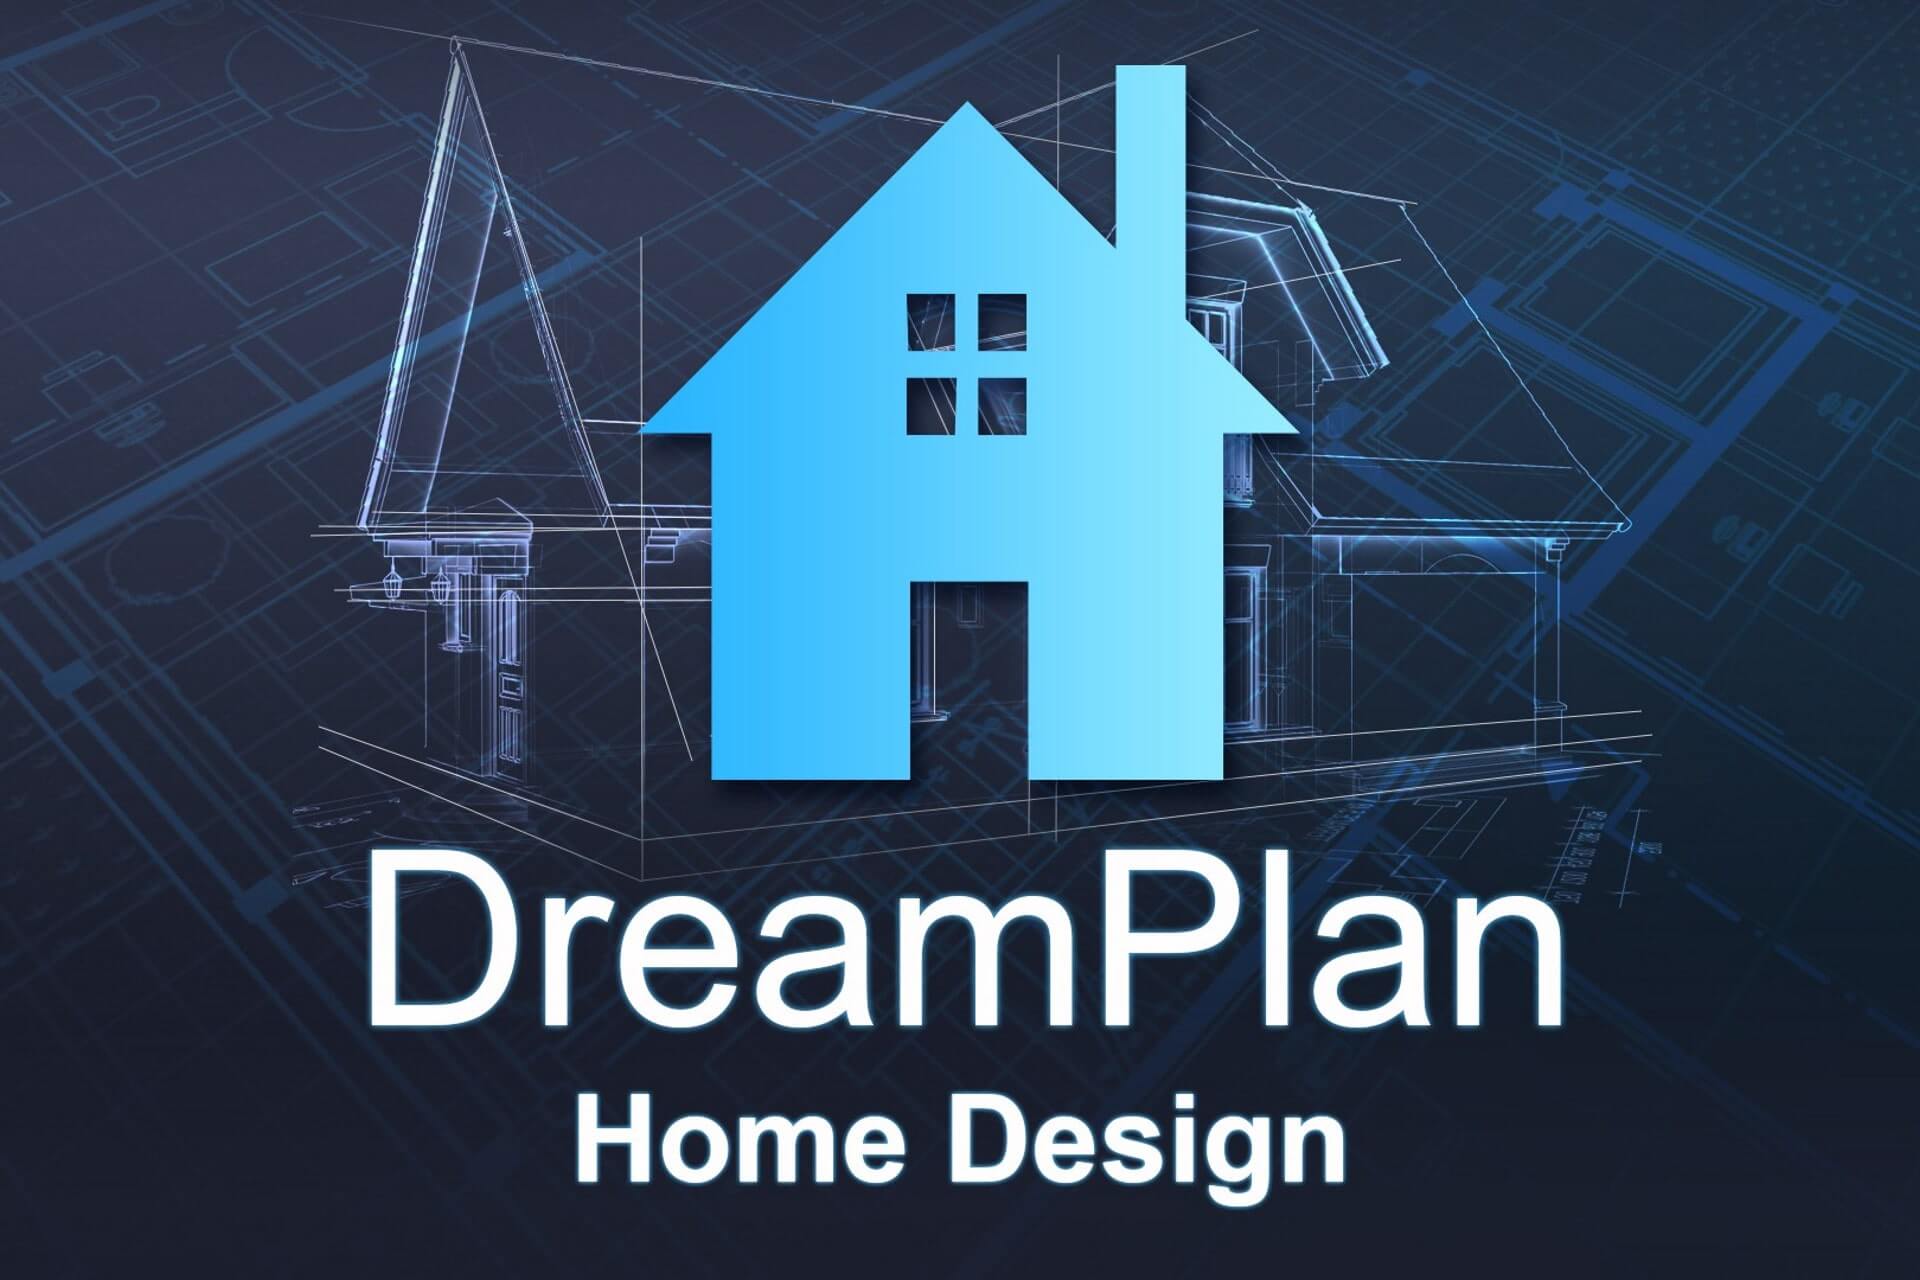 DreamPlan Home Design Software free download: How to use it?